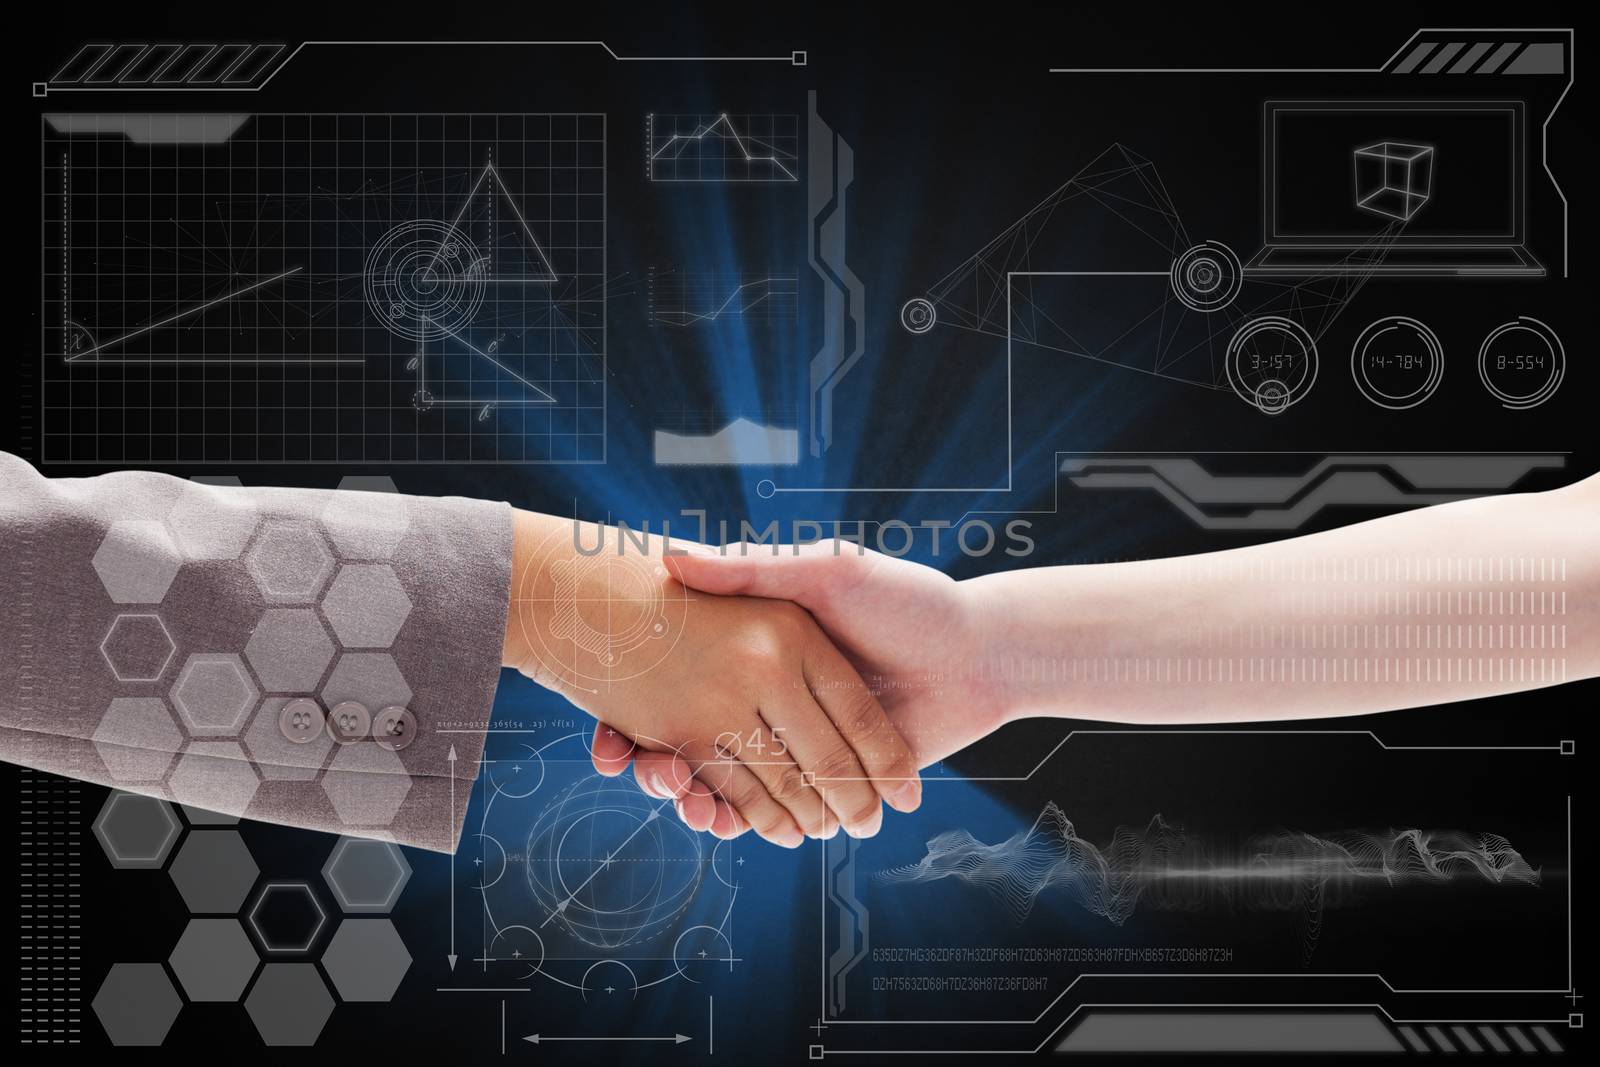 Handshake between two women against technology interface